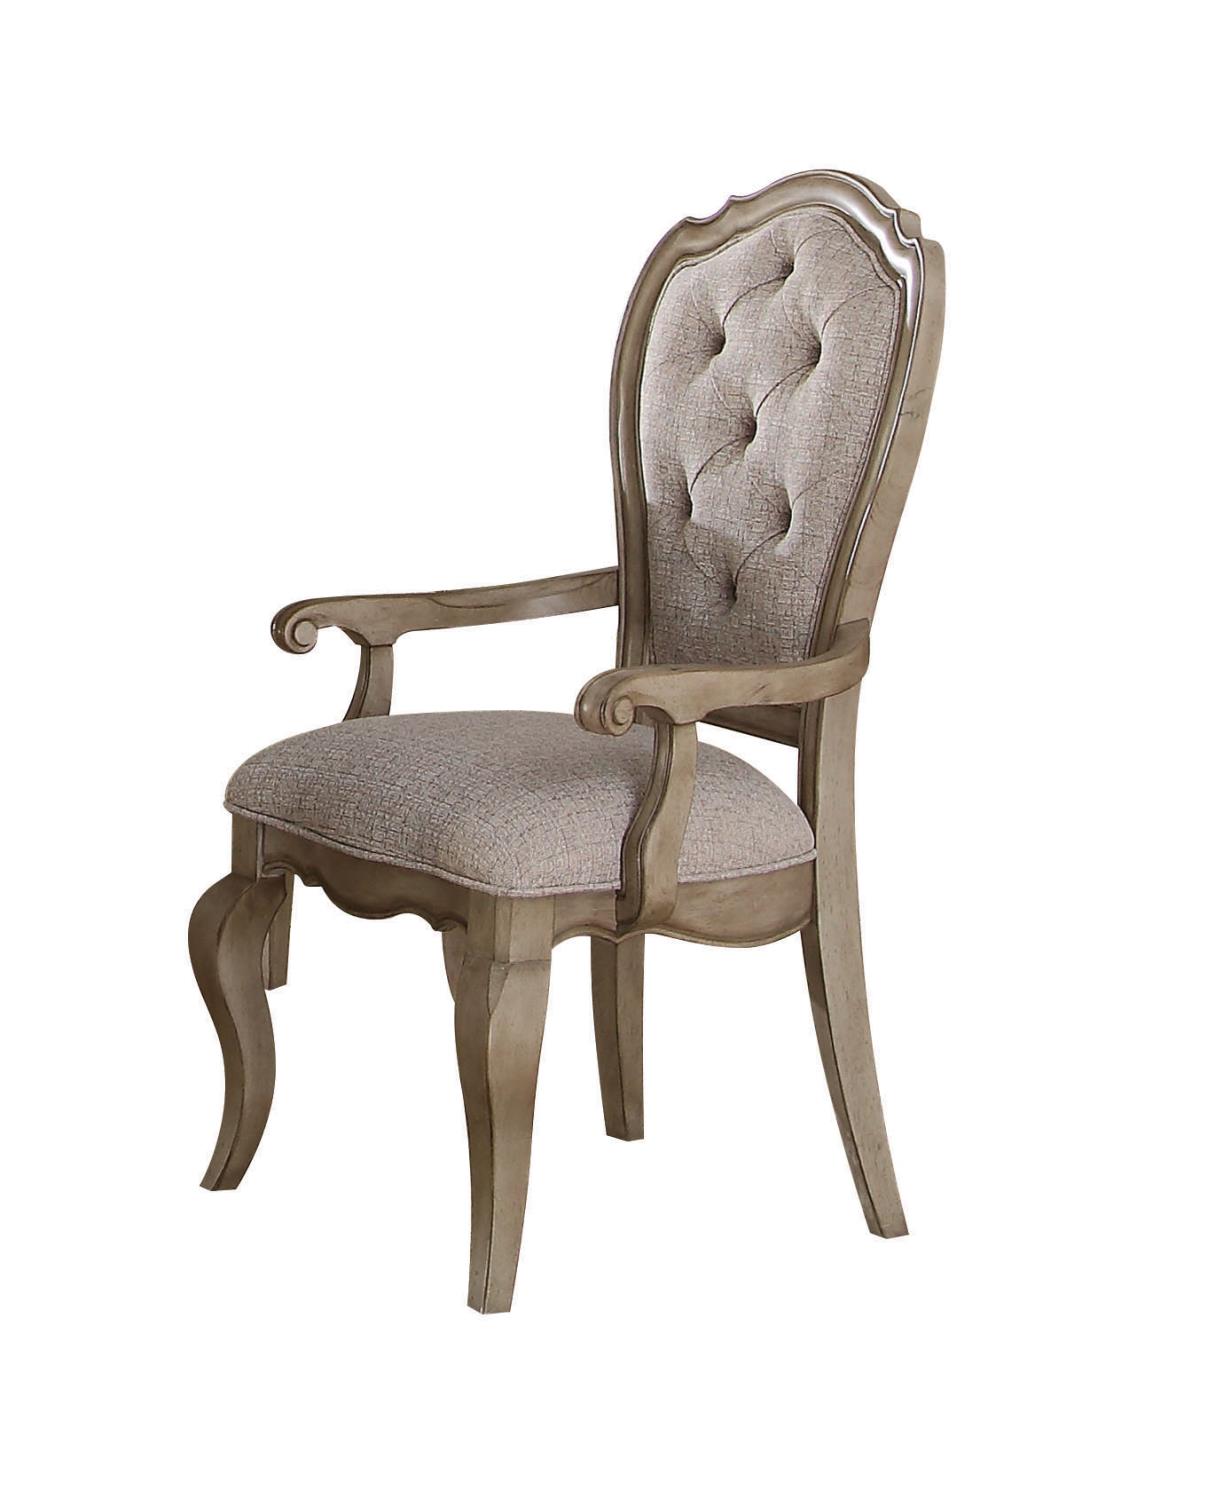 Plumage Arm Chair - Antique Taupe - Set of 2